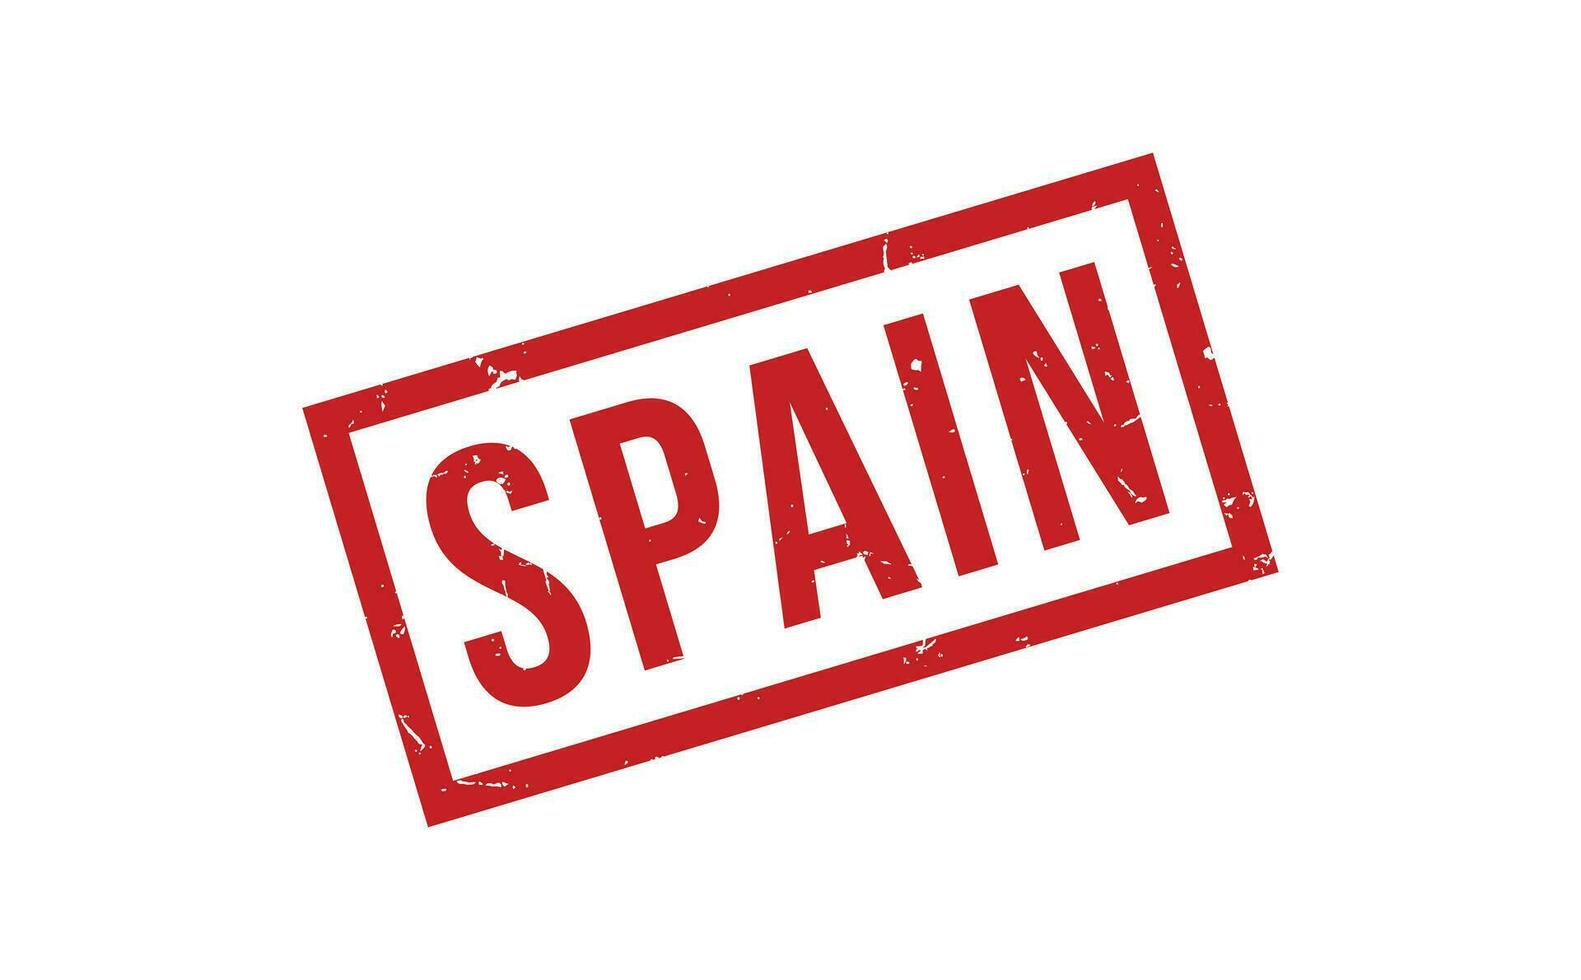 Spain Rubber Stamp Seal Vector